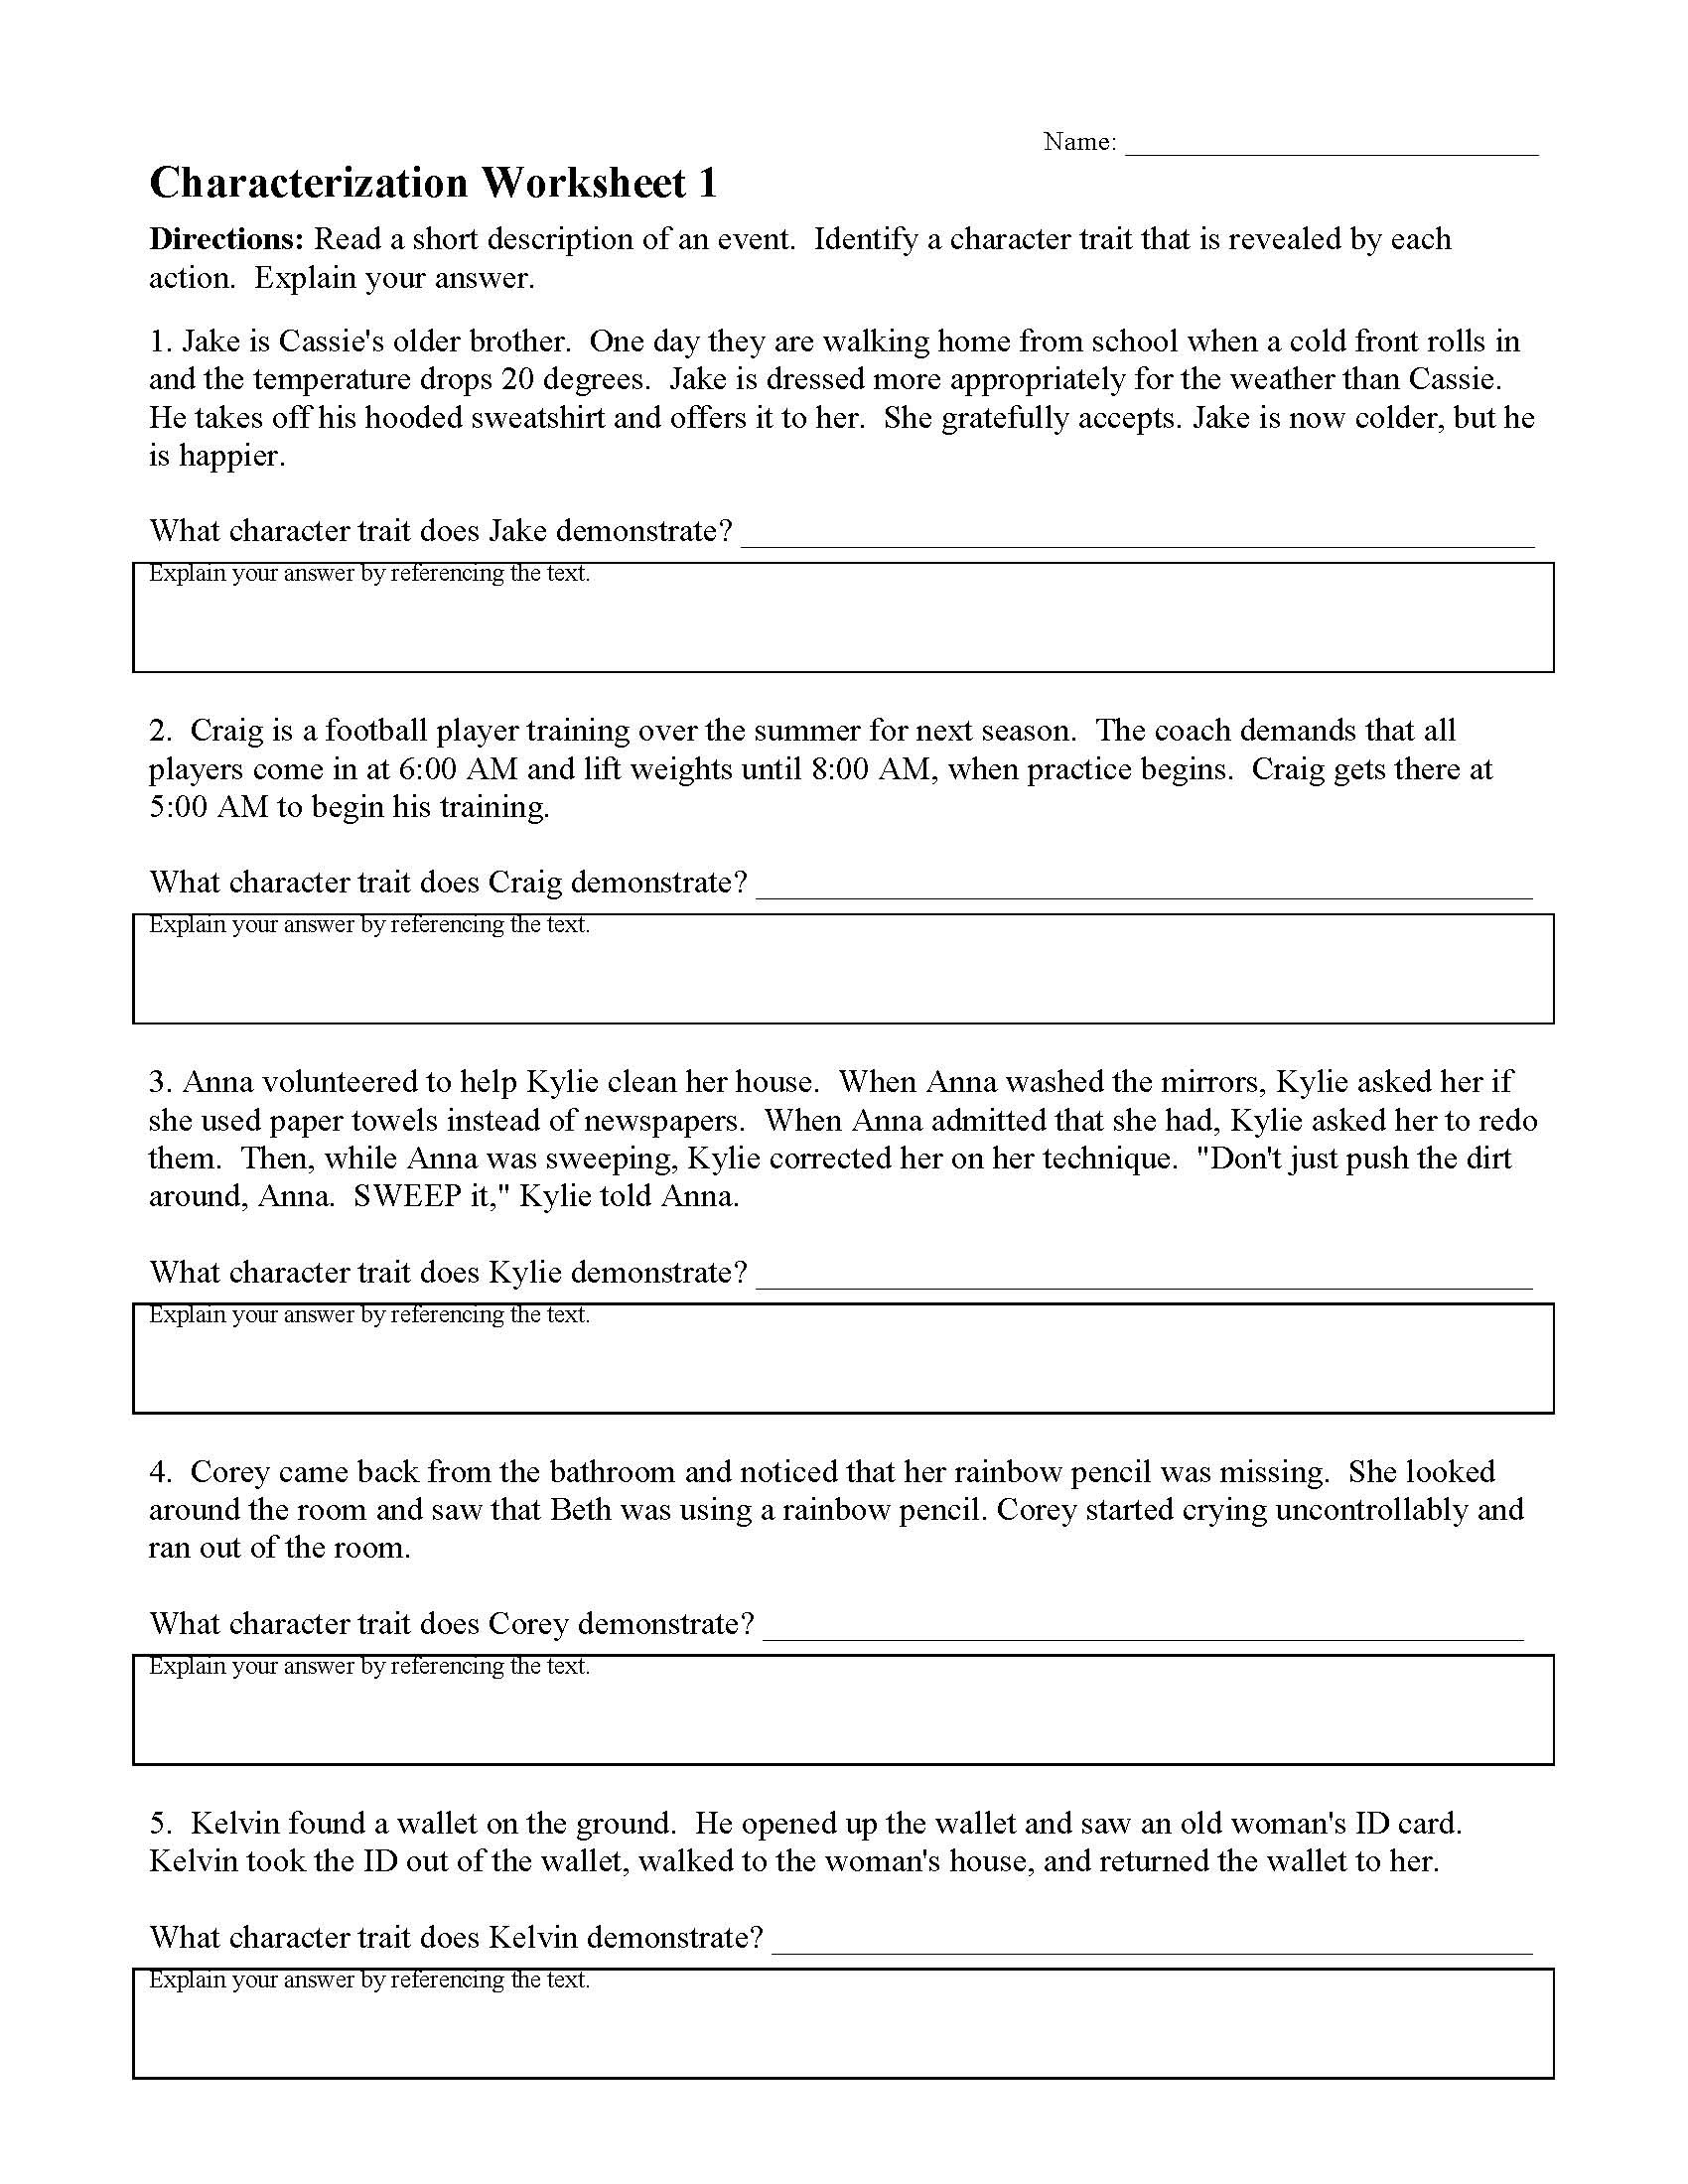 Direct and Indirect Characterization Worksheet Characterization Worksheets